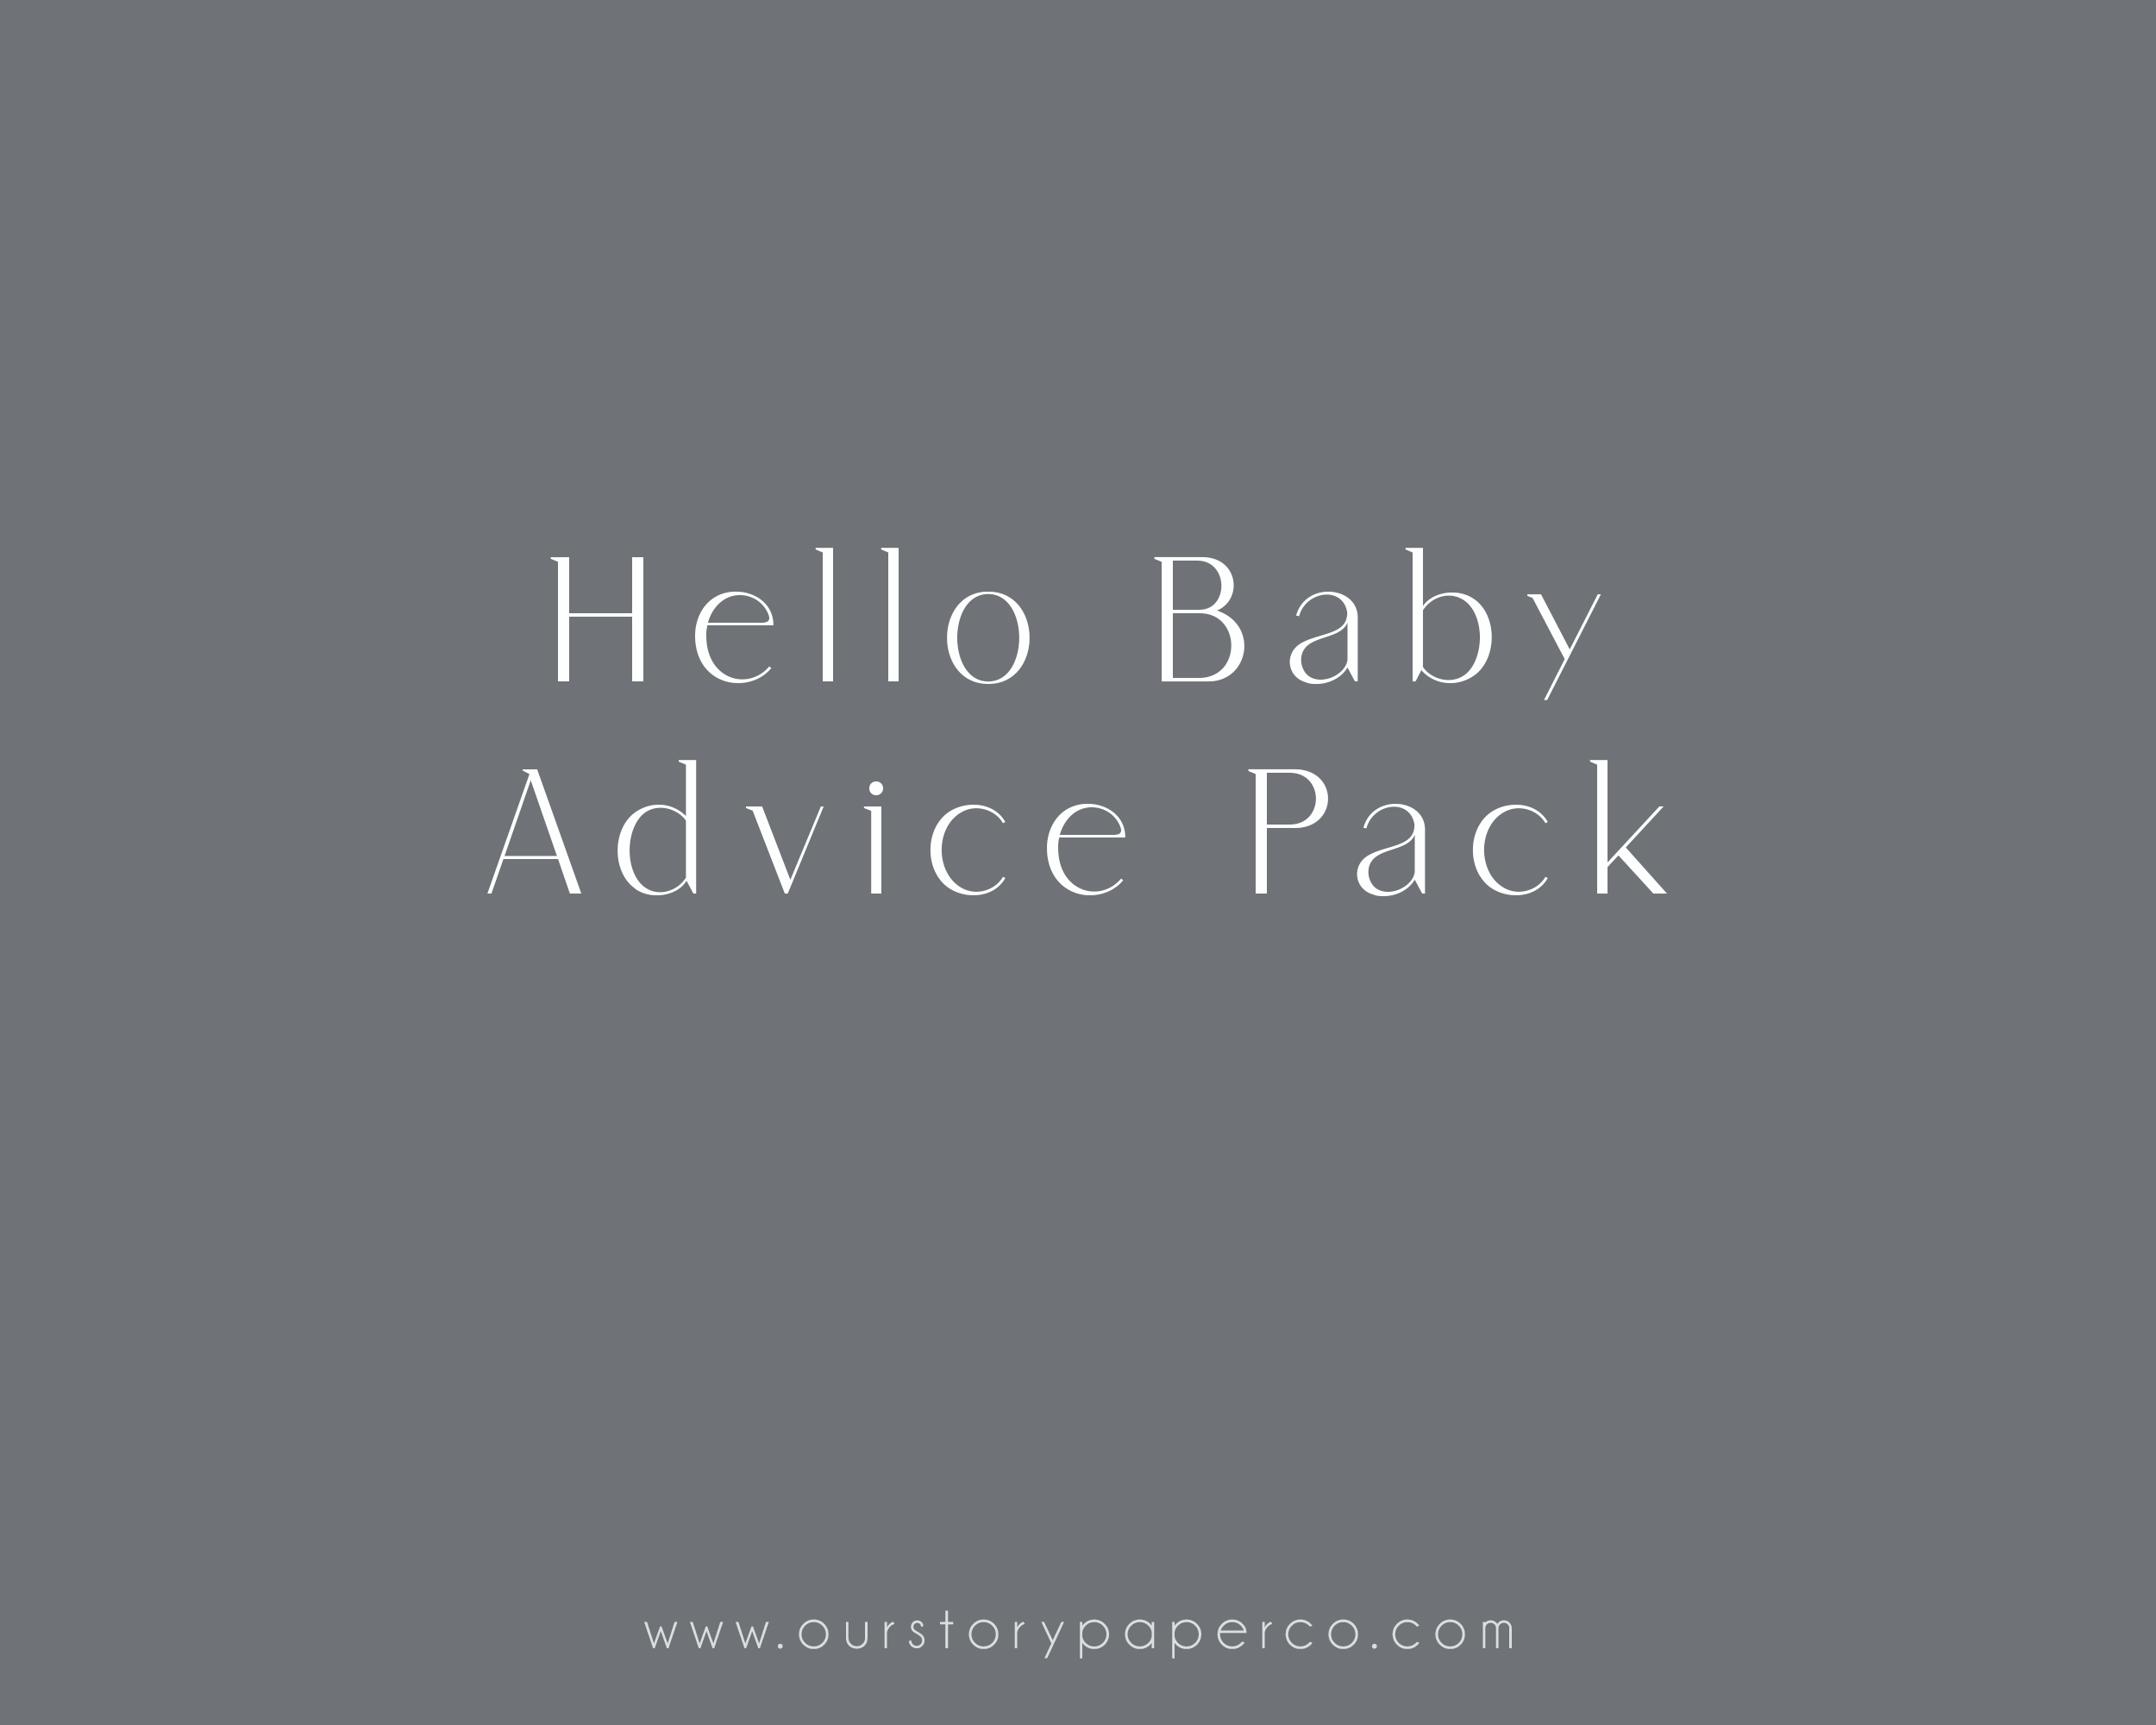 Baby Shower Games | "Hello Baby" Advice Pack - Our Story Paper Co.